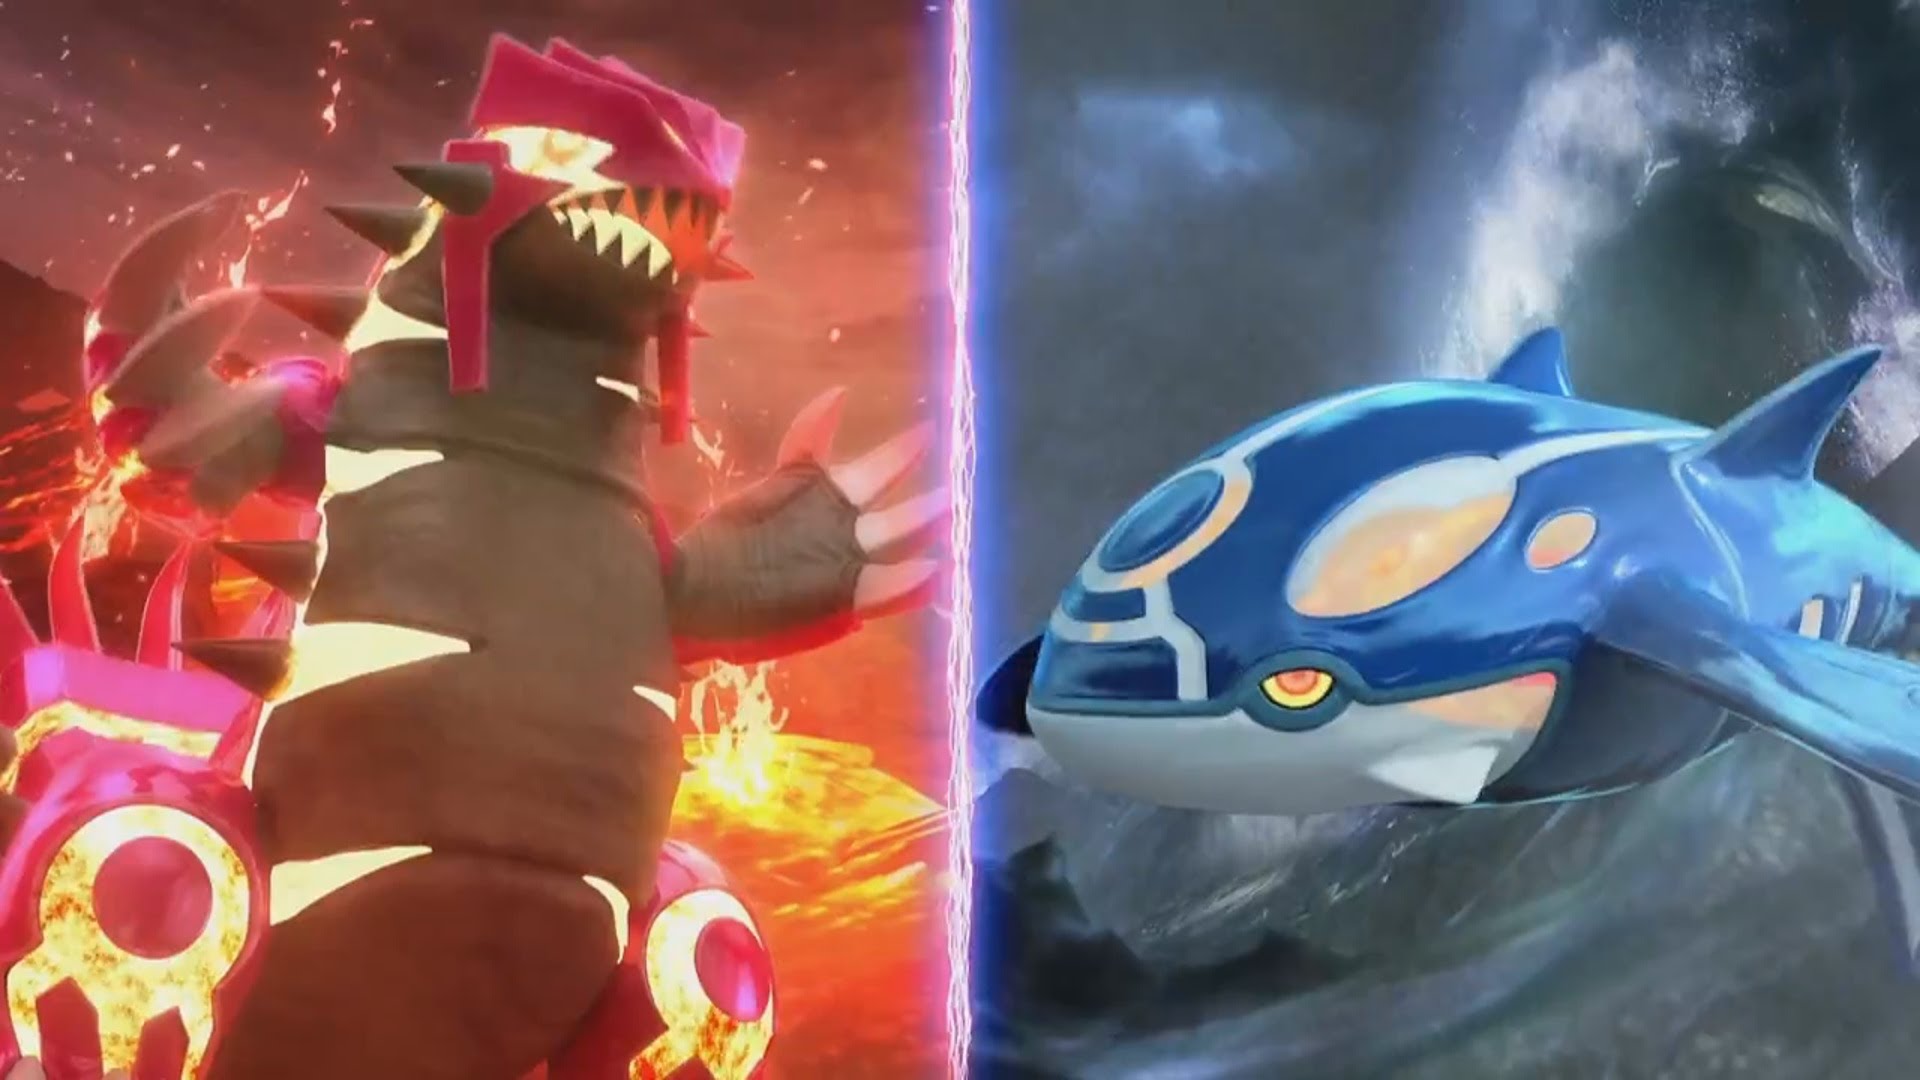 ... Alpha Sapphire Trailer Footage + Primal Groudon and Kyogre - YouTube